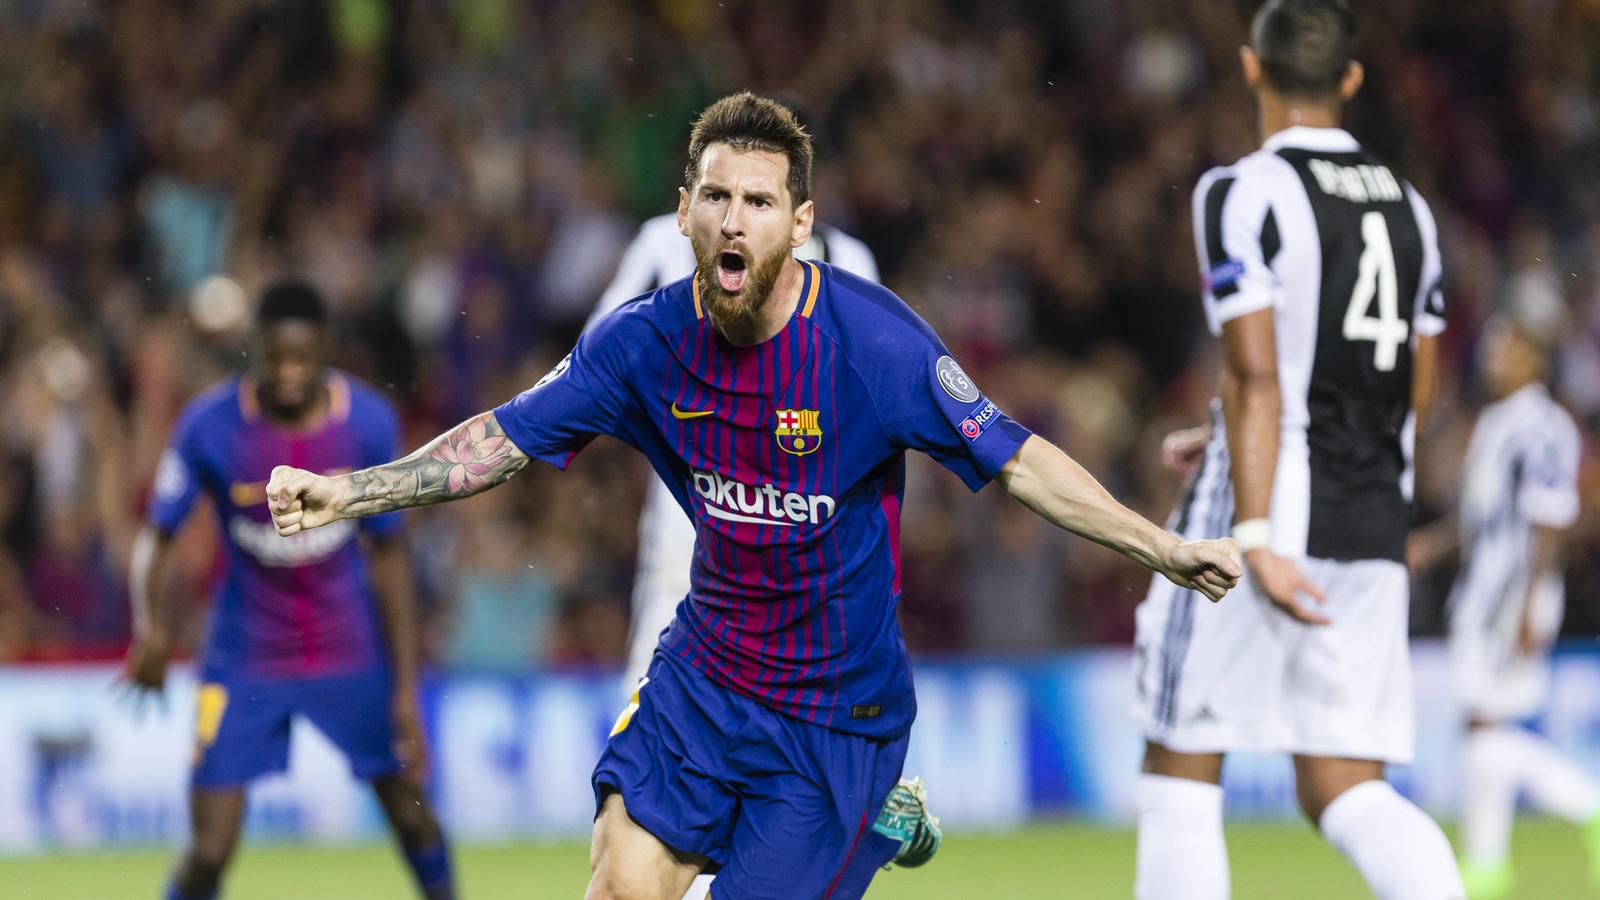 SPAIN - Sep,12th: Lionel Messi celebrates scoring the goal during the match between FC Barcelona Barca - Juventus, for the group stage, round 1 of the Champions League, held at Camp Nou Stadium on 12th September 2017 in Barcelona, Spain. (Credit: Mik